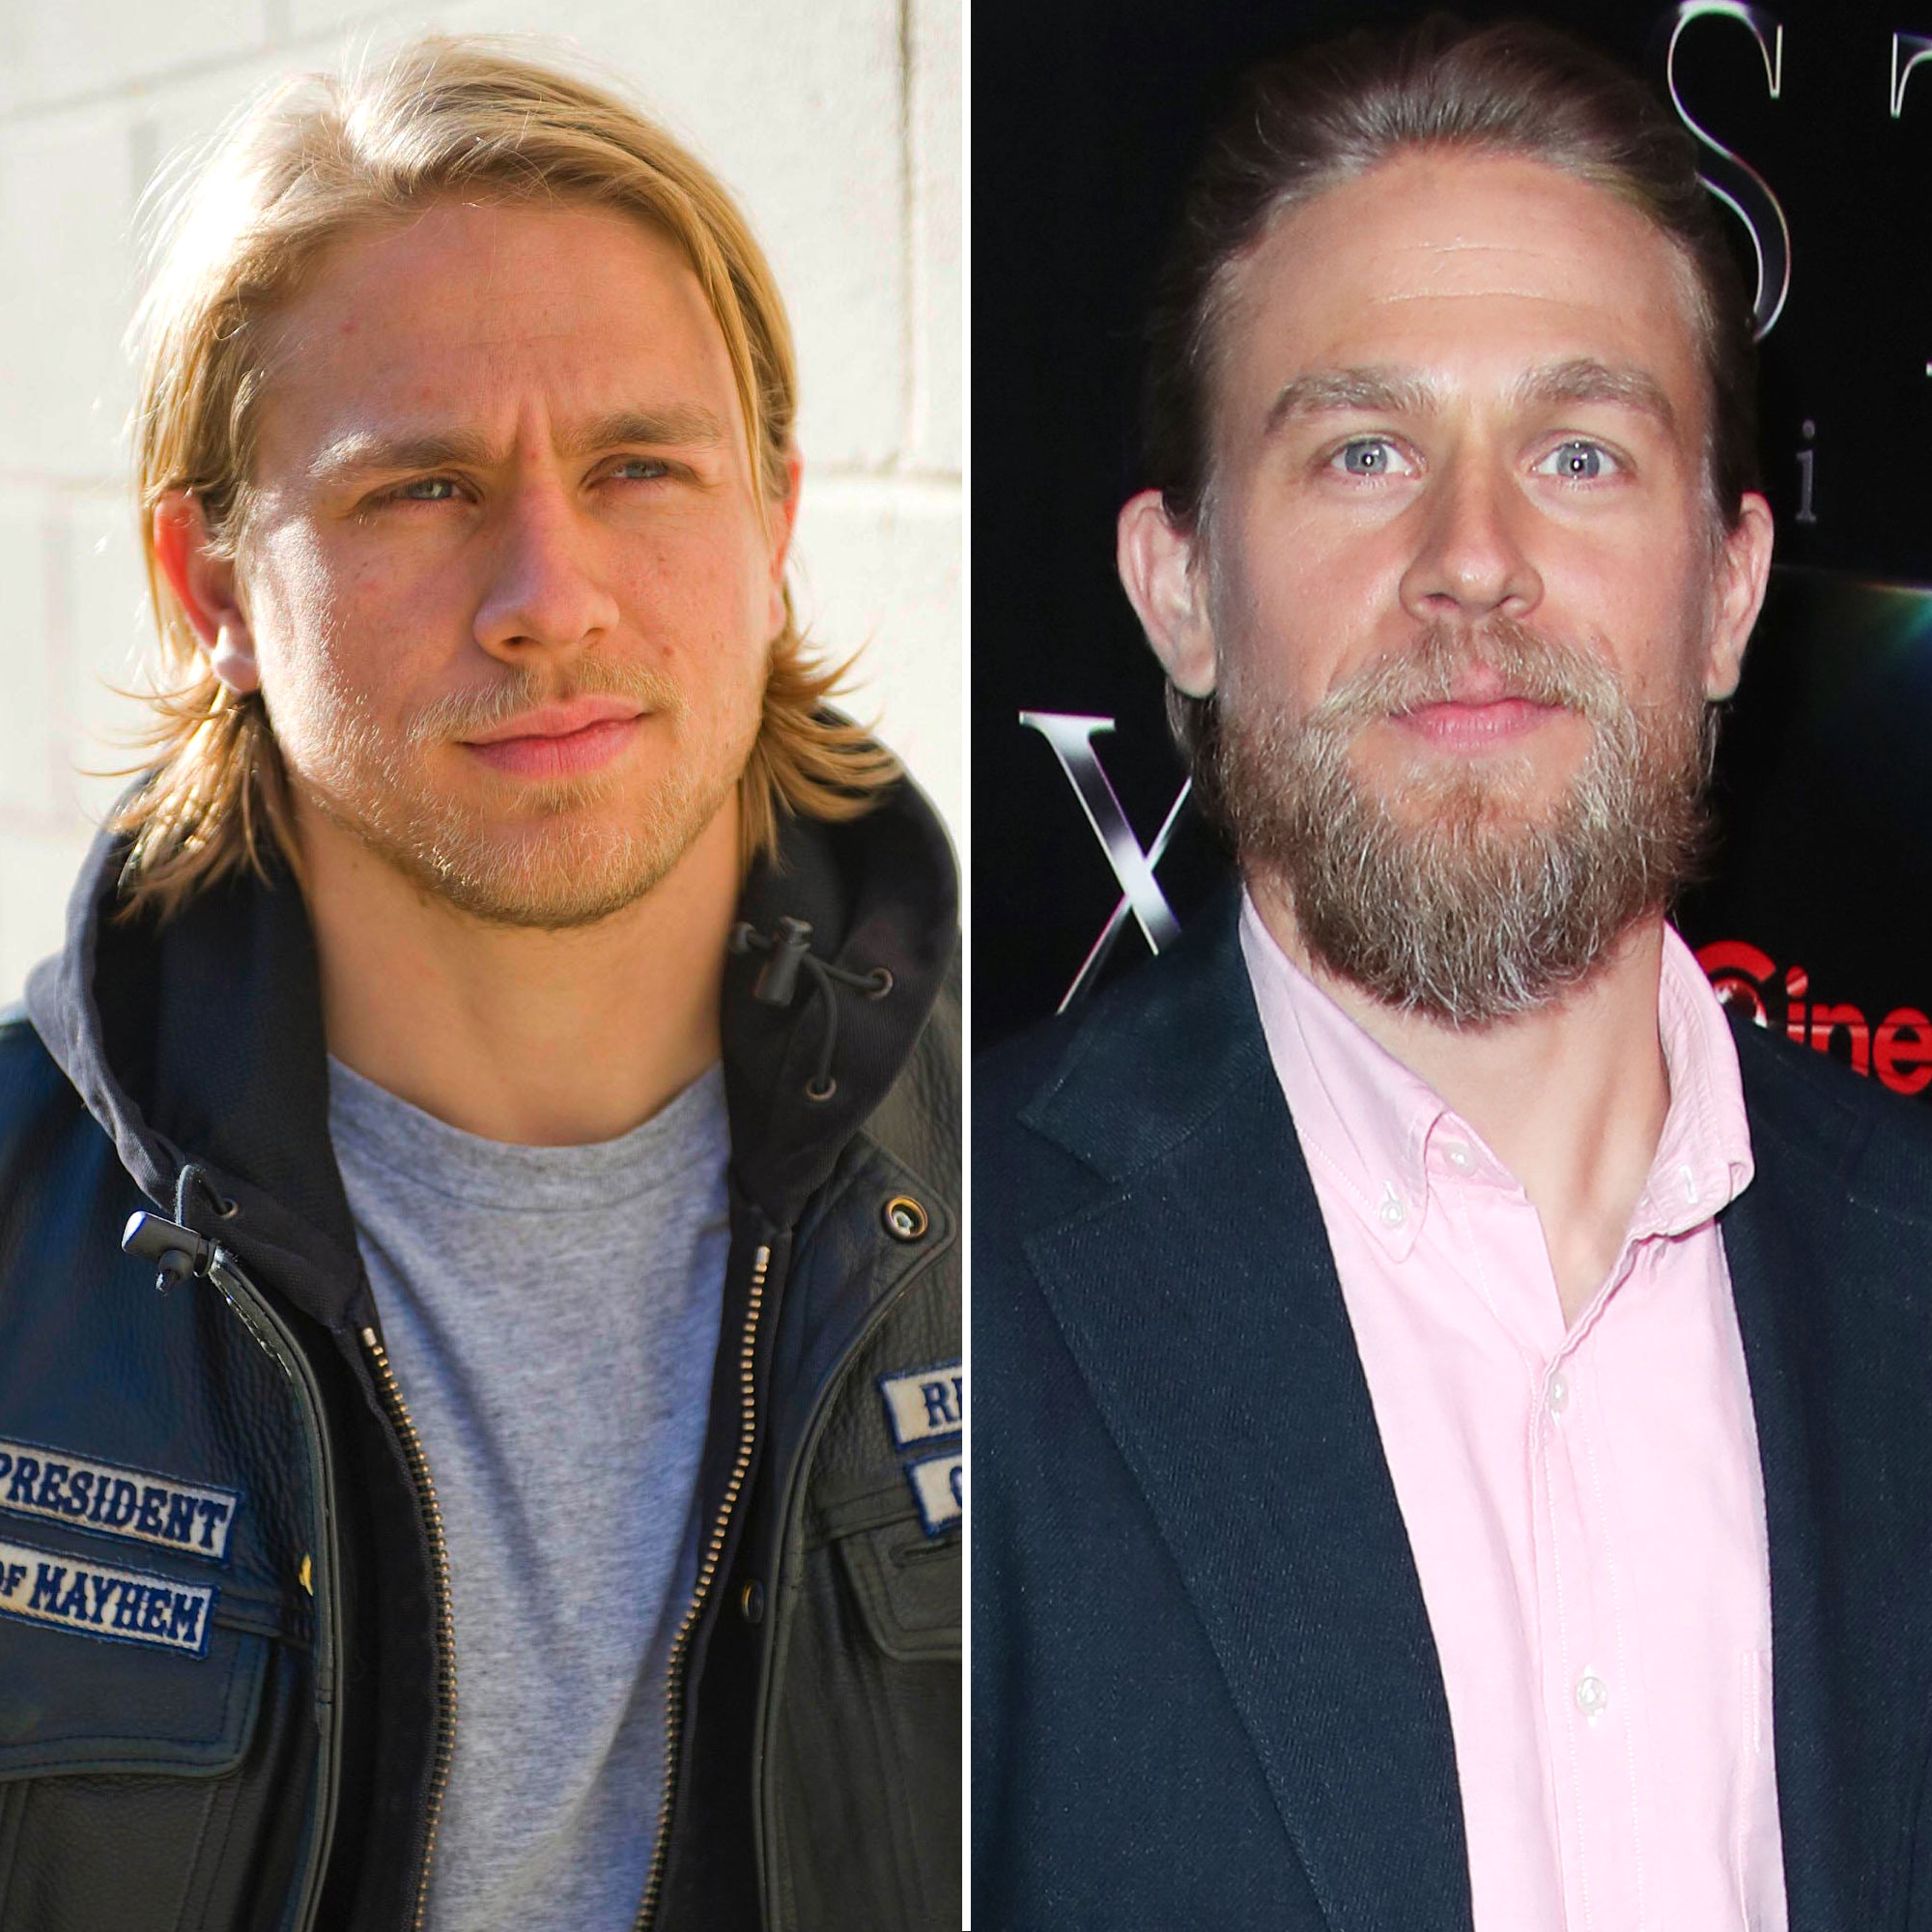 Sons of Anarchy' Cast: Where Are They Now?